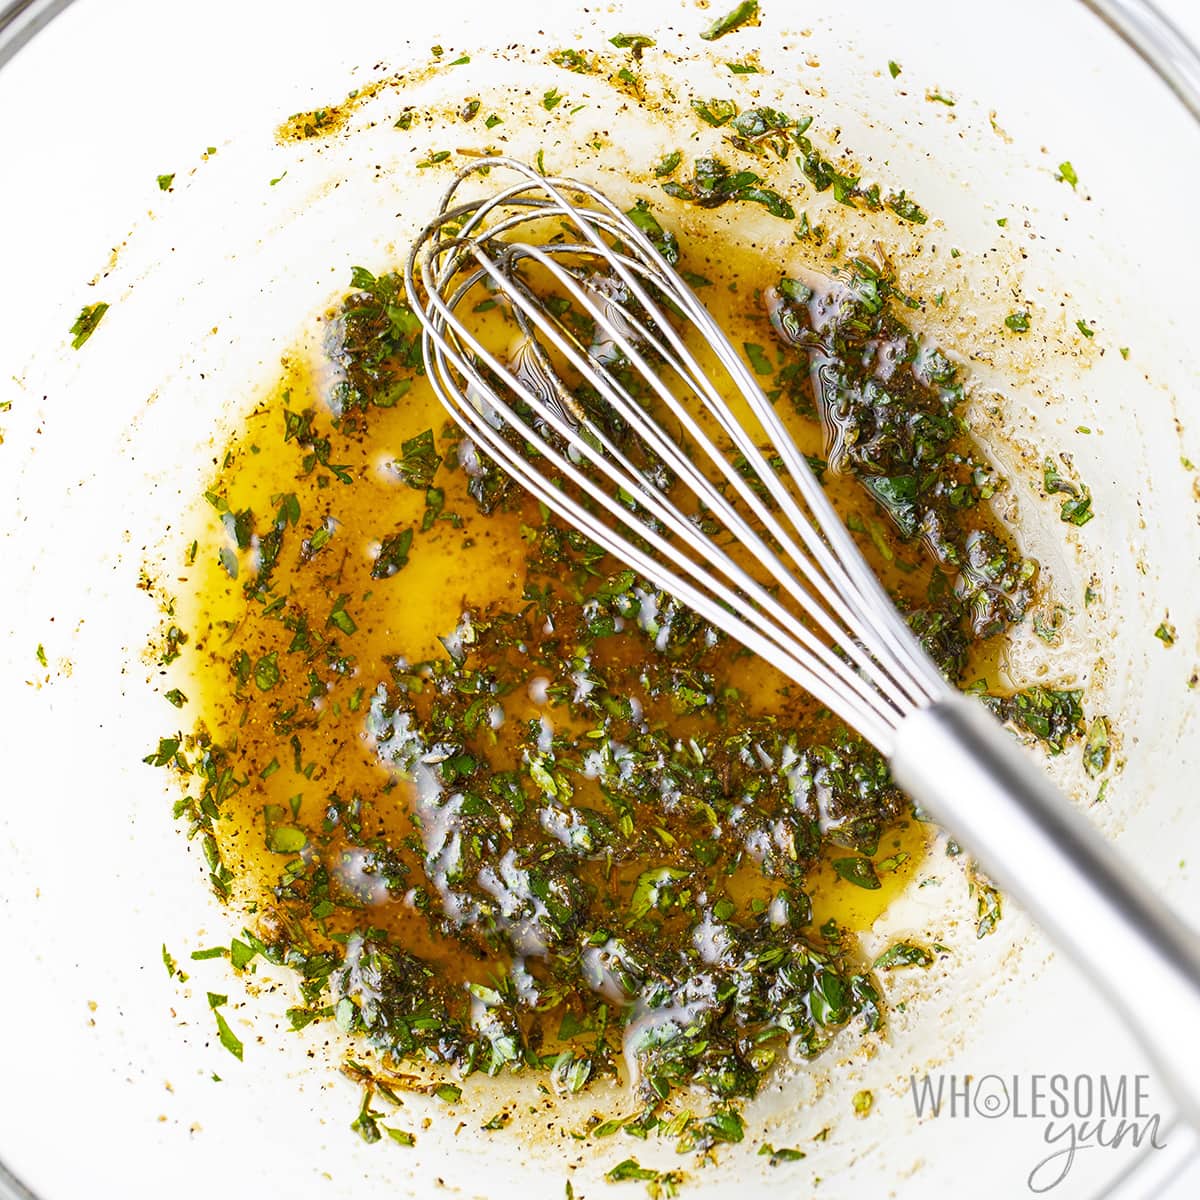 Marinade mixed in a glass bowl with whisk.